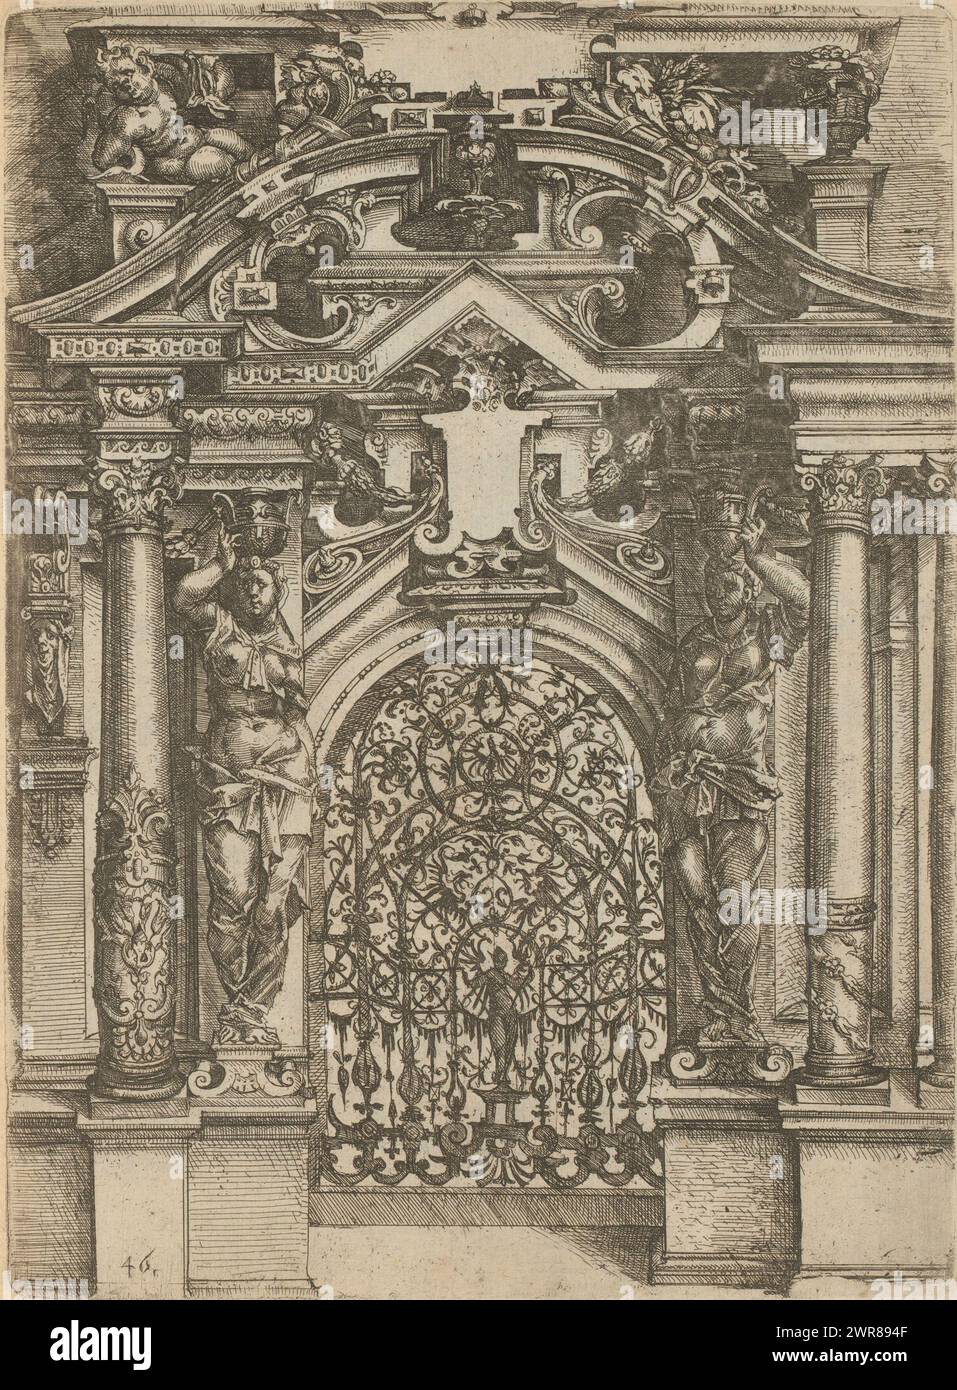 Portal with iron gate flanked by caryatids, Architectura (series title), Numbered: 46. Print is part of a book., print maker: Wendel Dietterlin (I), publisher: Bernhard Jobin, Straatsburg (Frankrijk), 1593 - 1595, paper, etching, height 254 mm × width 186 mm Stock Photo